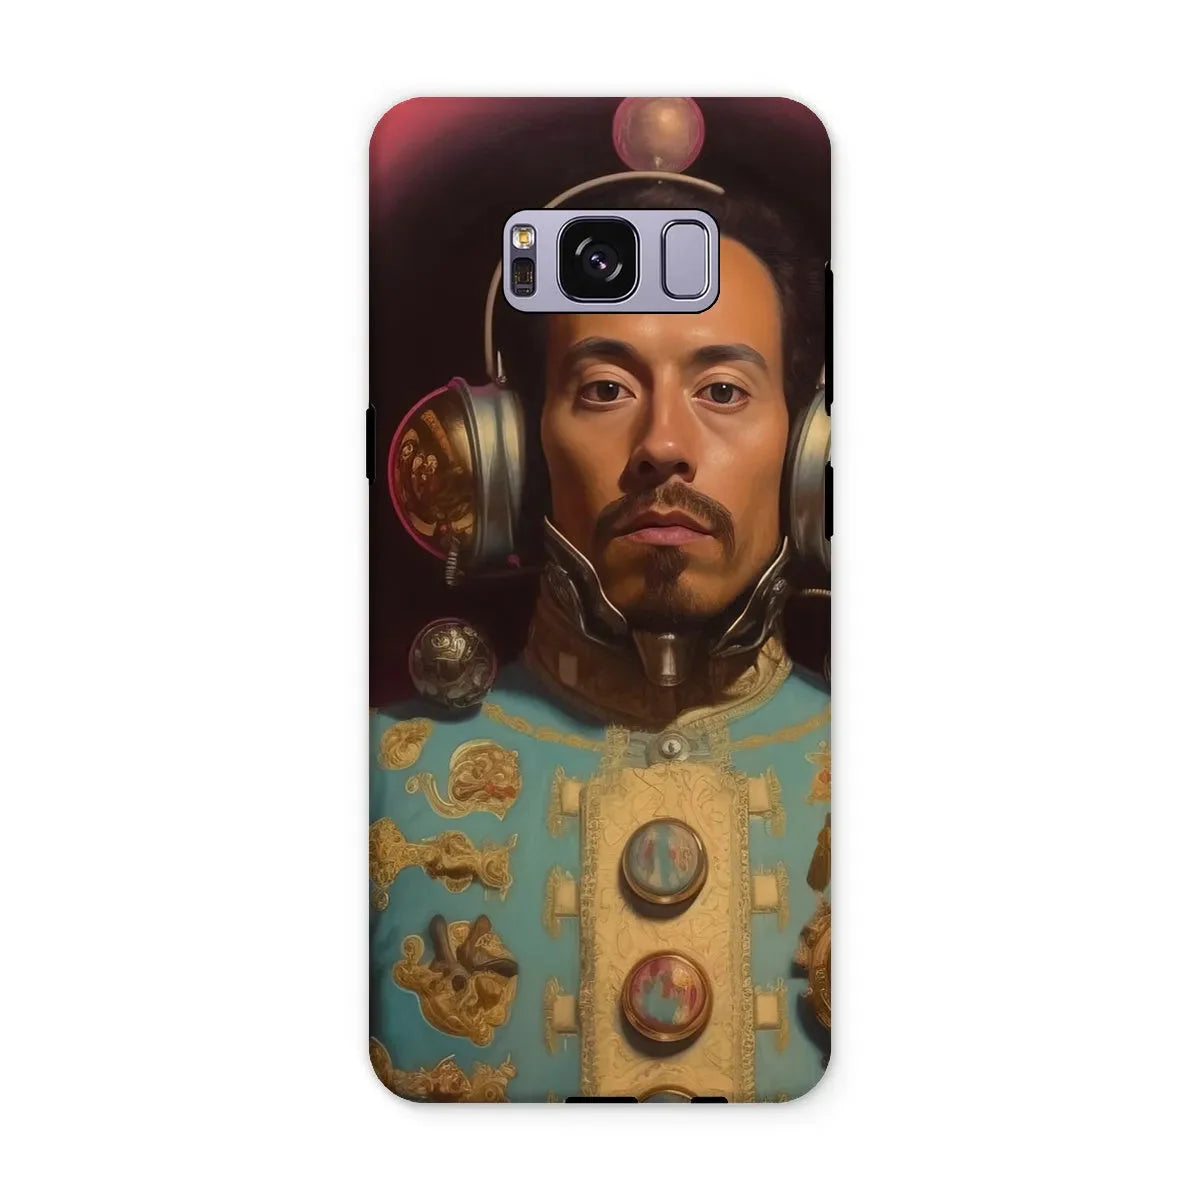 Armando The Gay Astronaut - Queercore Aesthetic Phone Case - Samsung Galaxy S8 Plus / Matte - Mobile Phone Cases